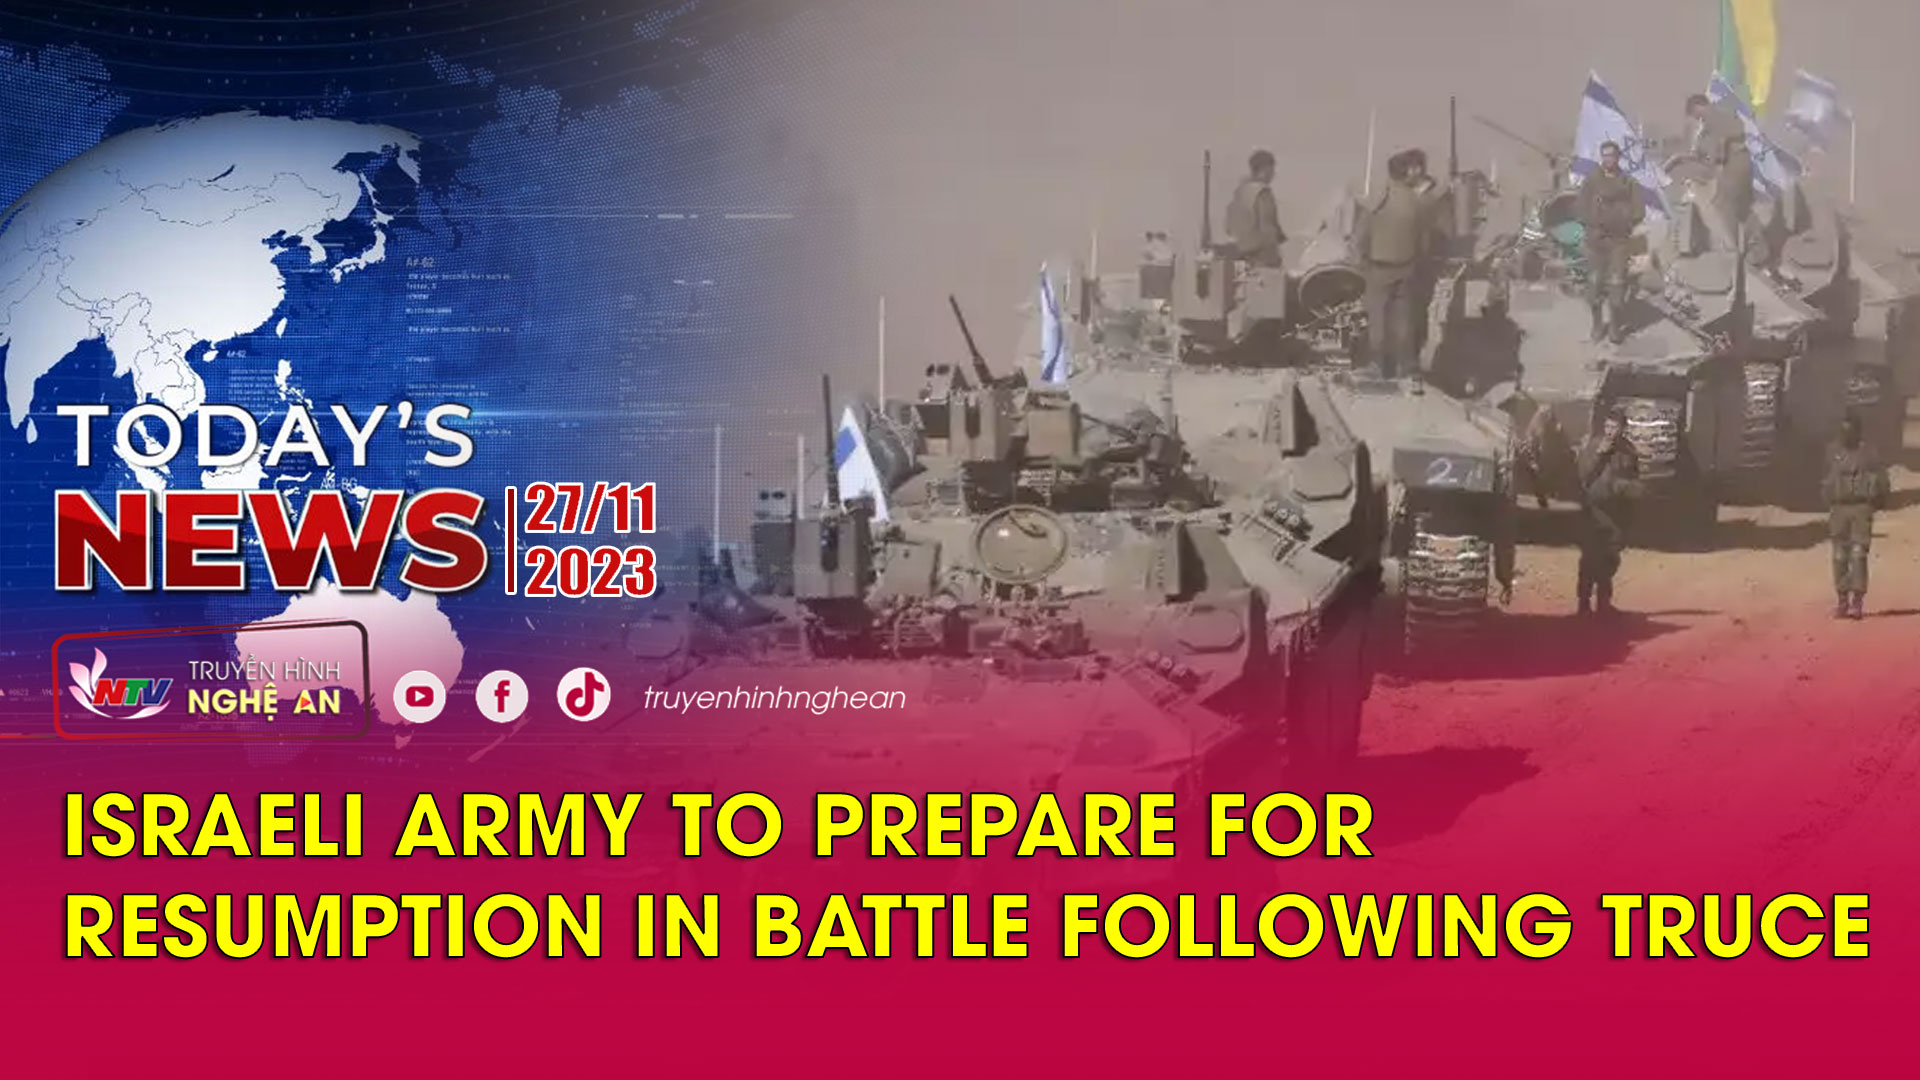 Today's News - 27/11/2023: Israeli army to prepare for resumption in battle following truce